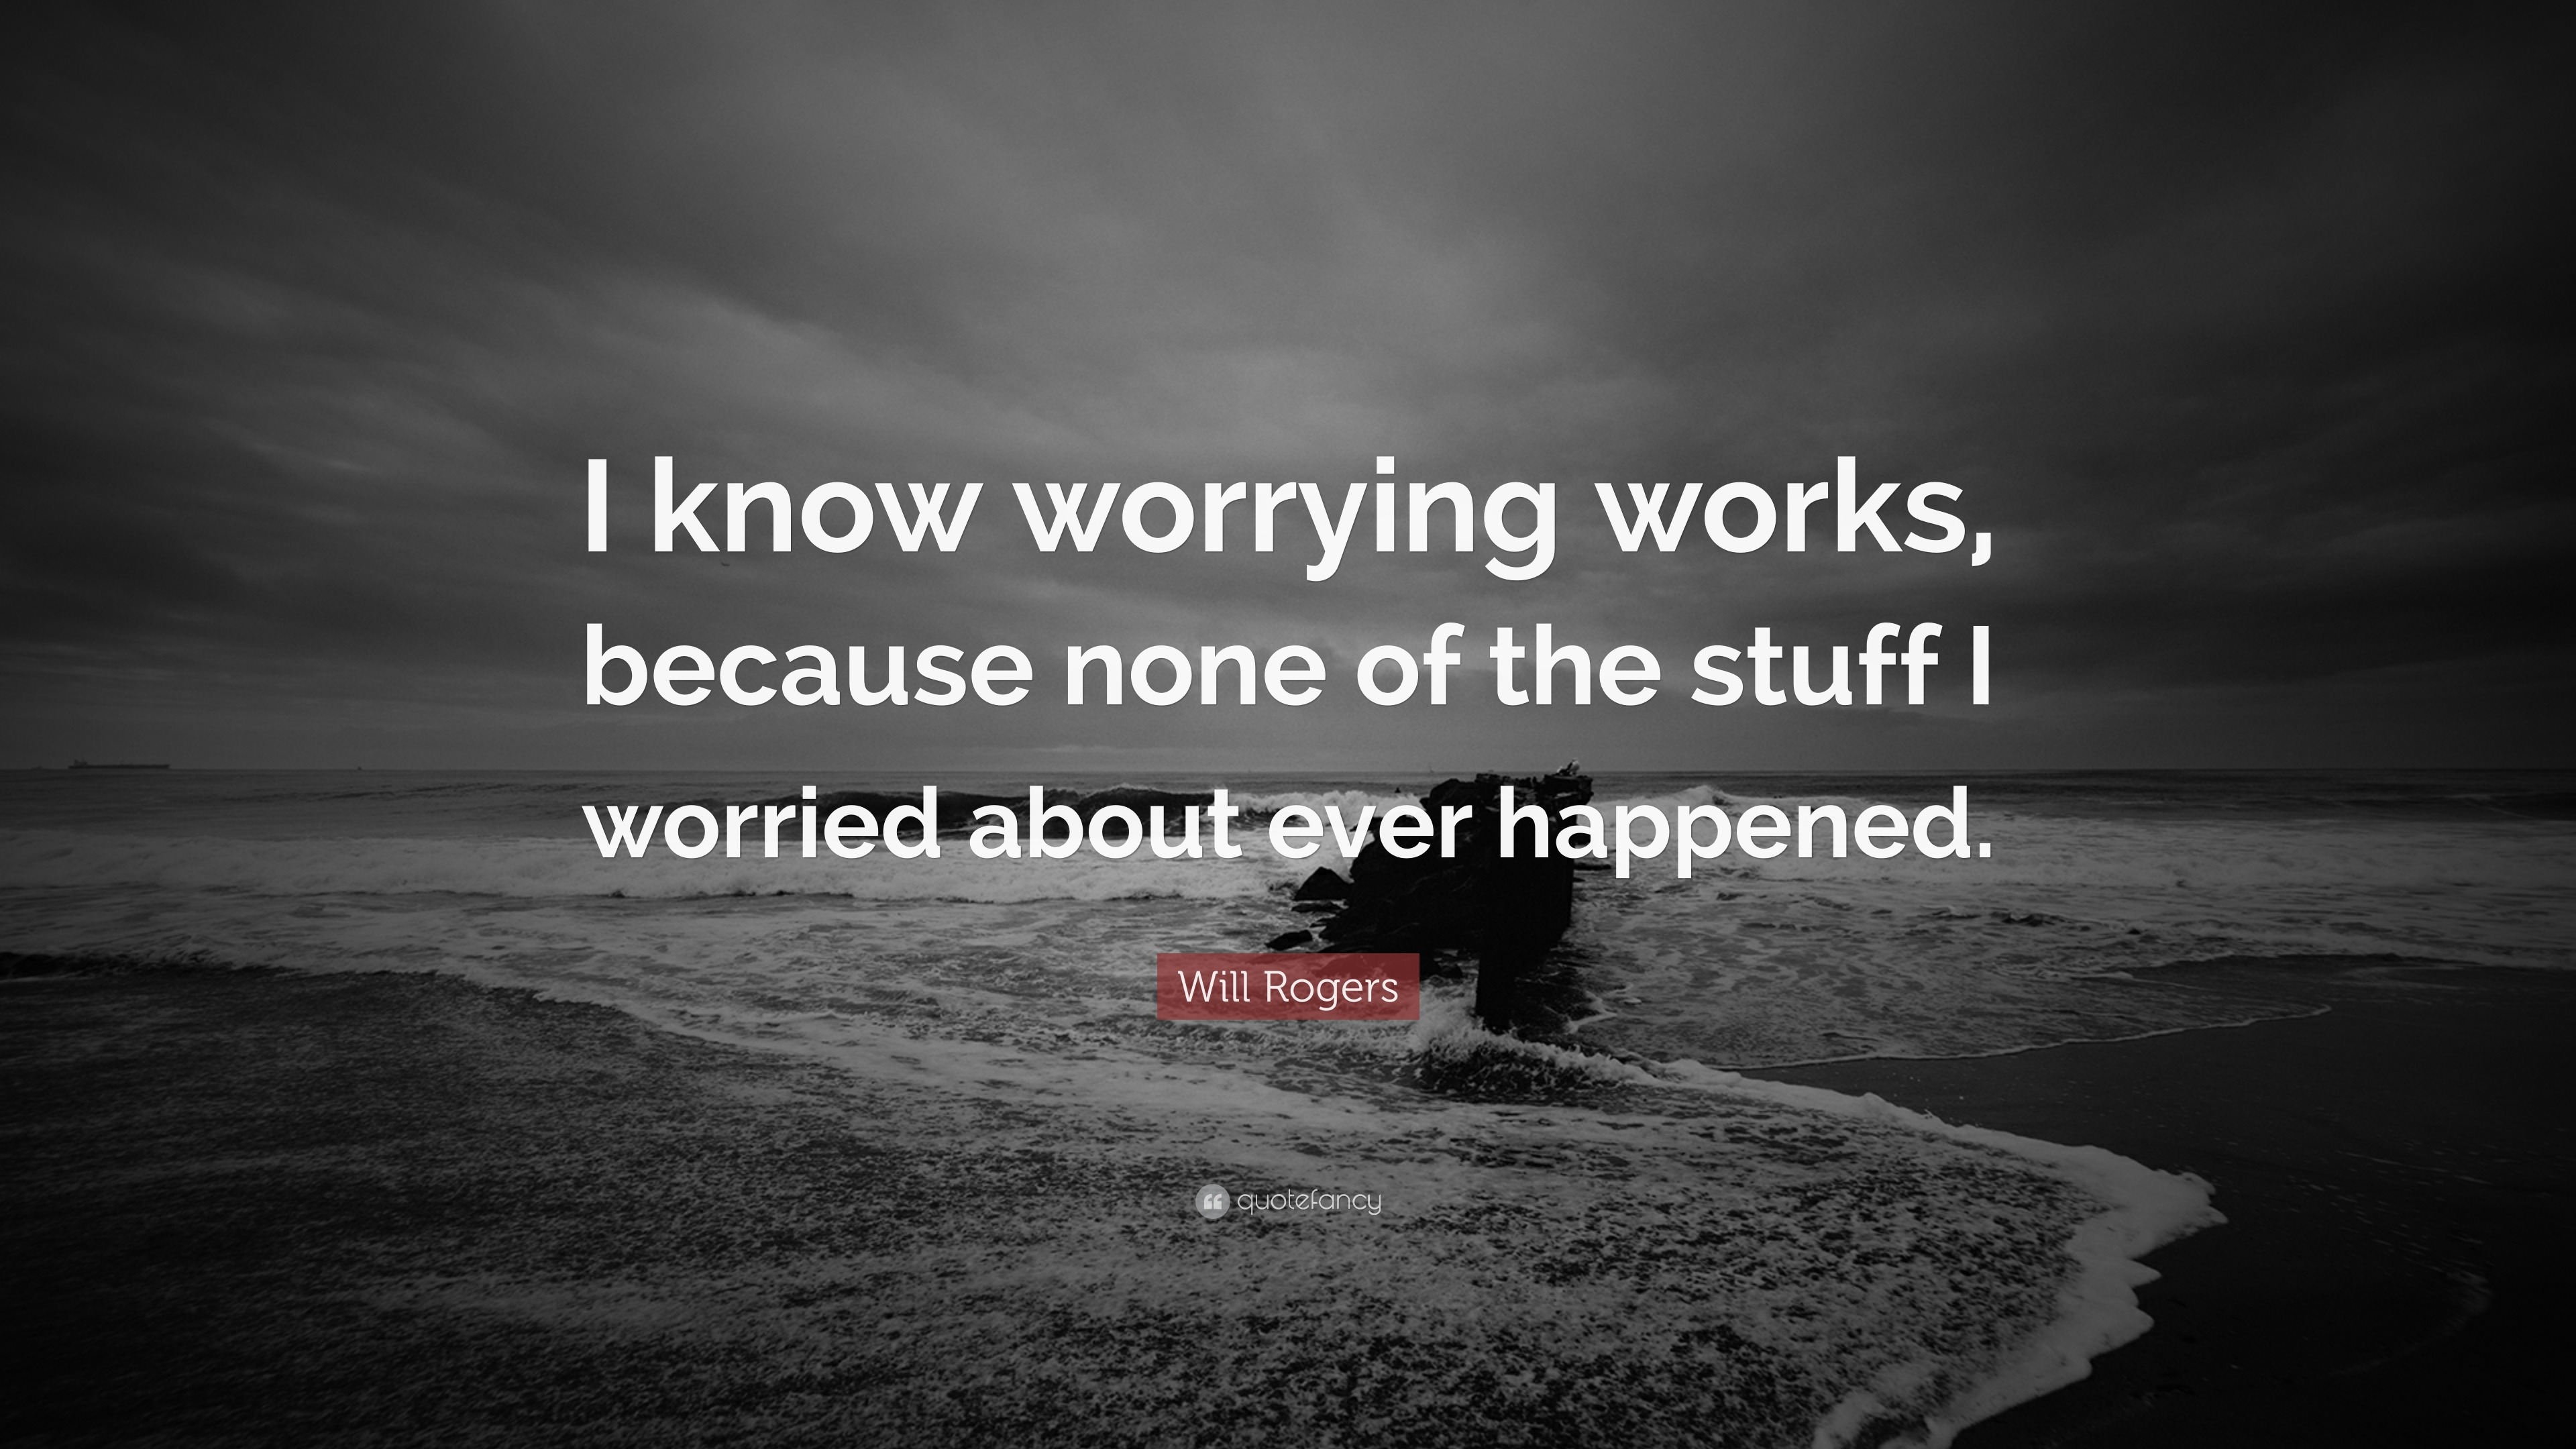 Will Rogers Quote: “I know worrying works, because none of the stuff I ...